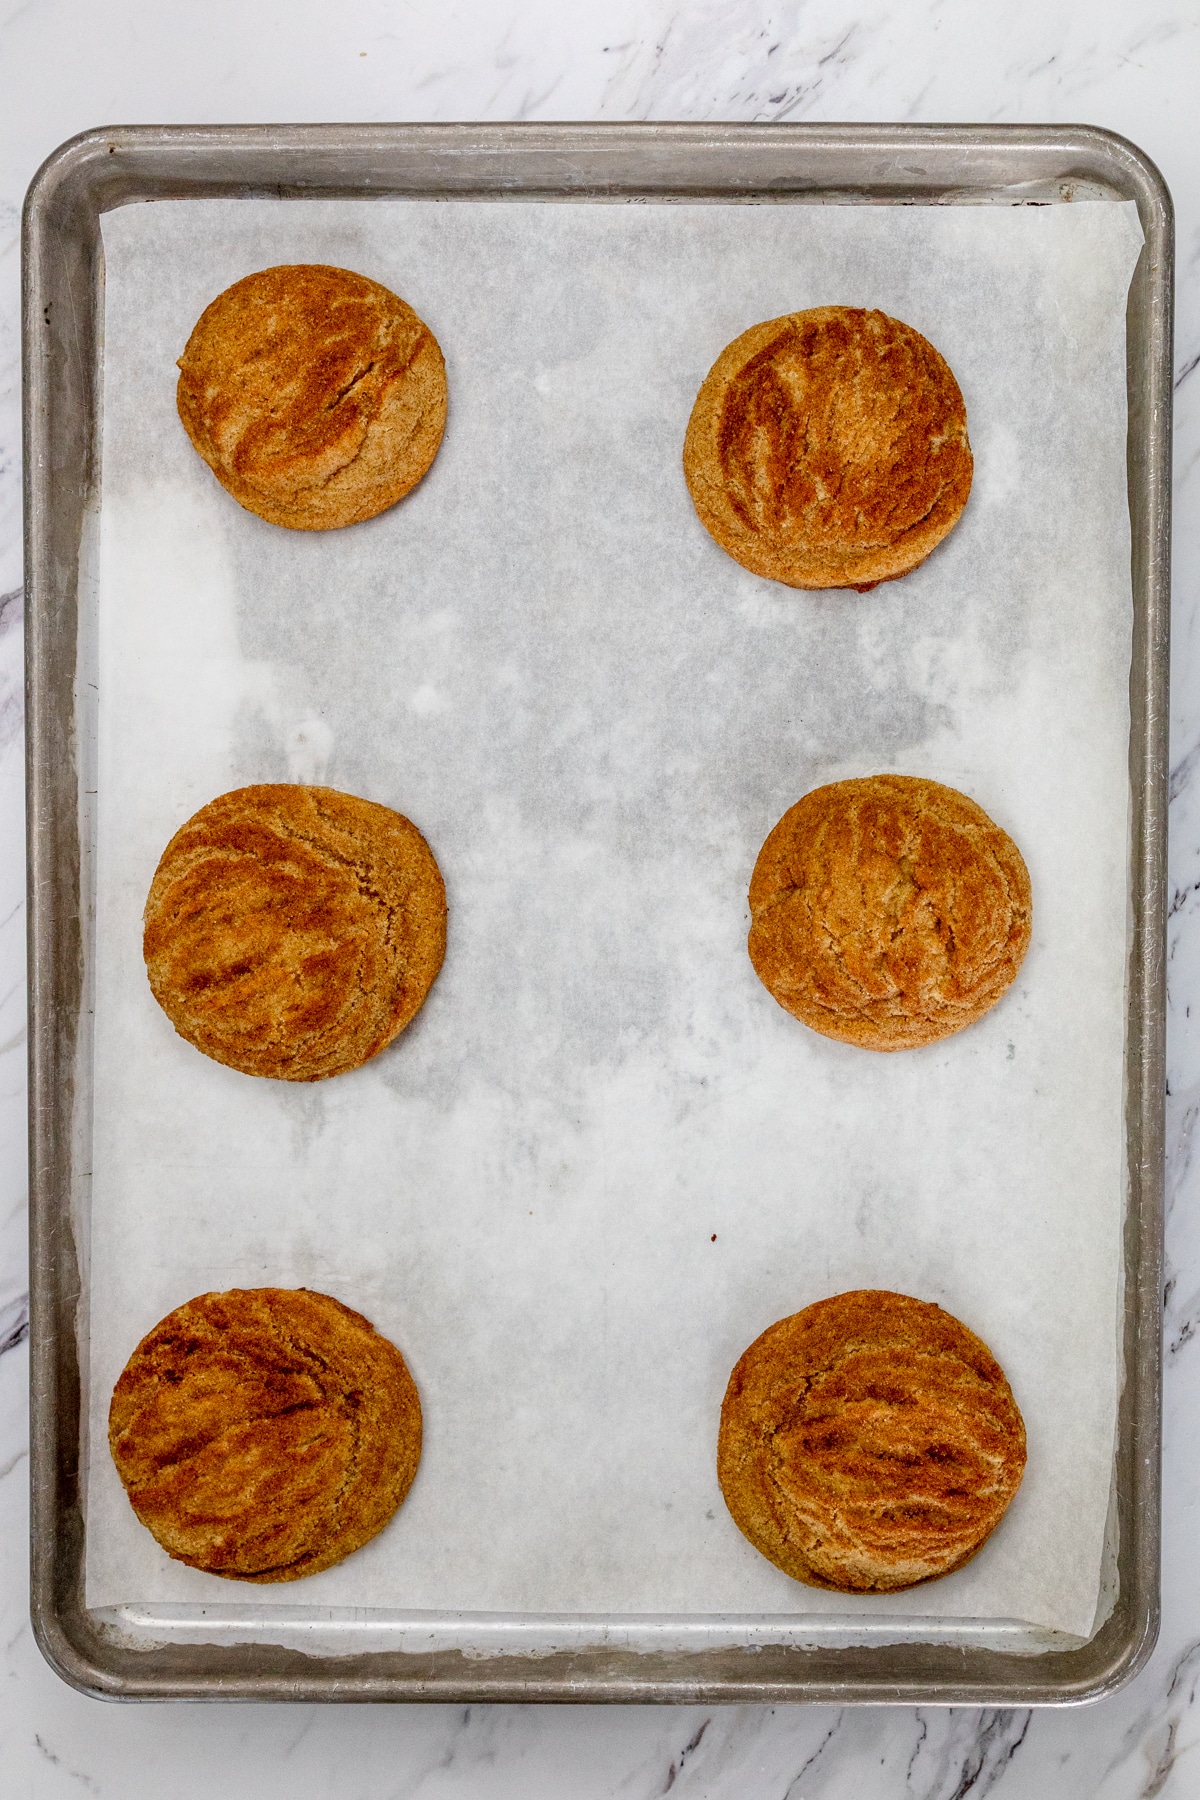 Top view of baking tray lined with parchment paper with baked Caramel Snickerdoodle Cookies on it.